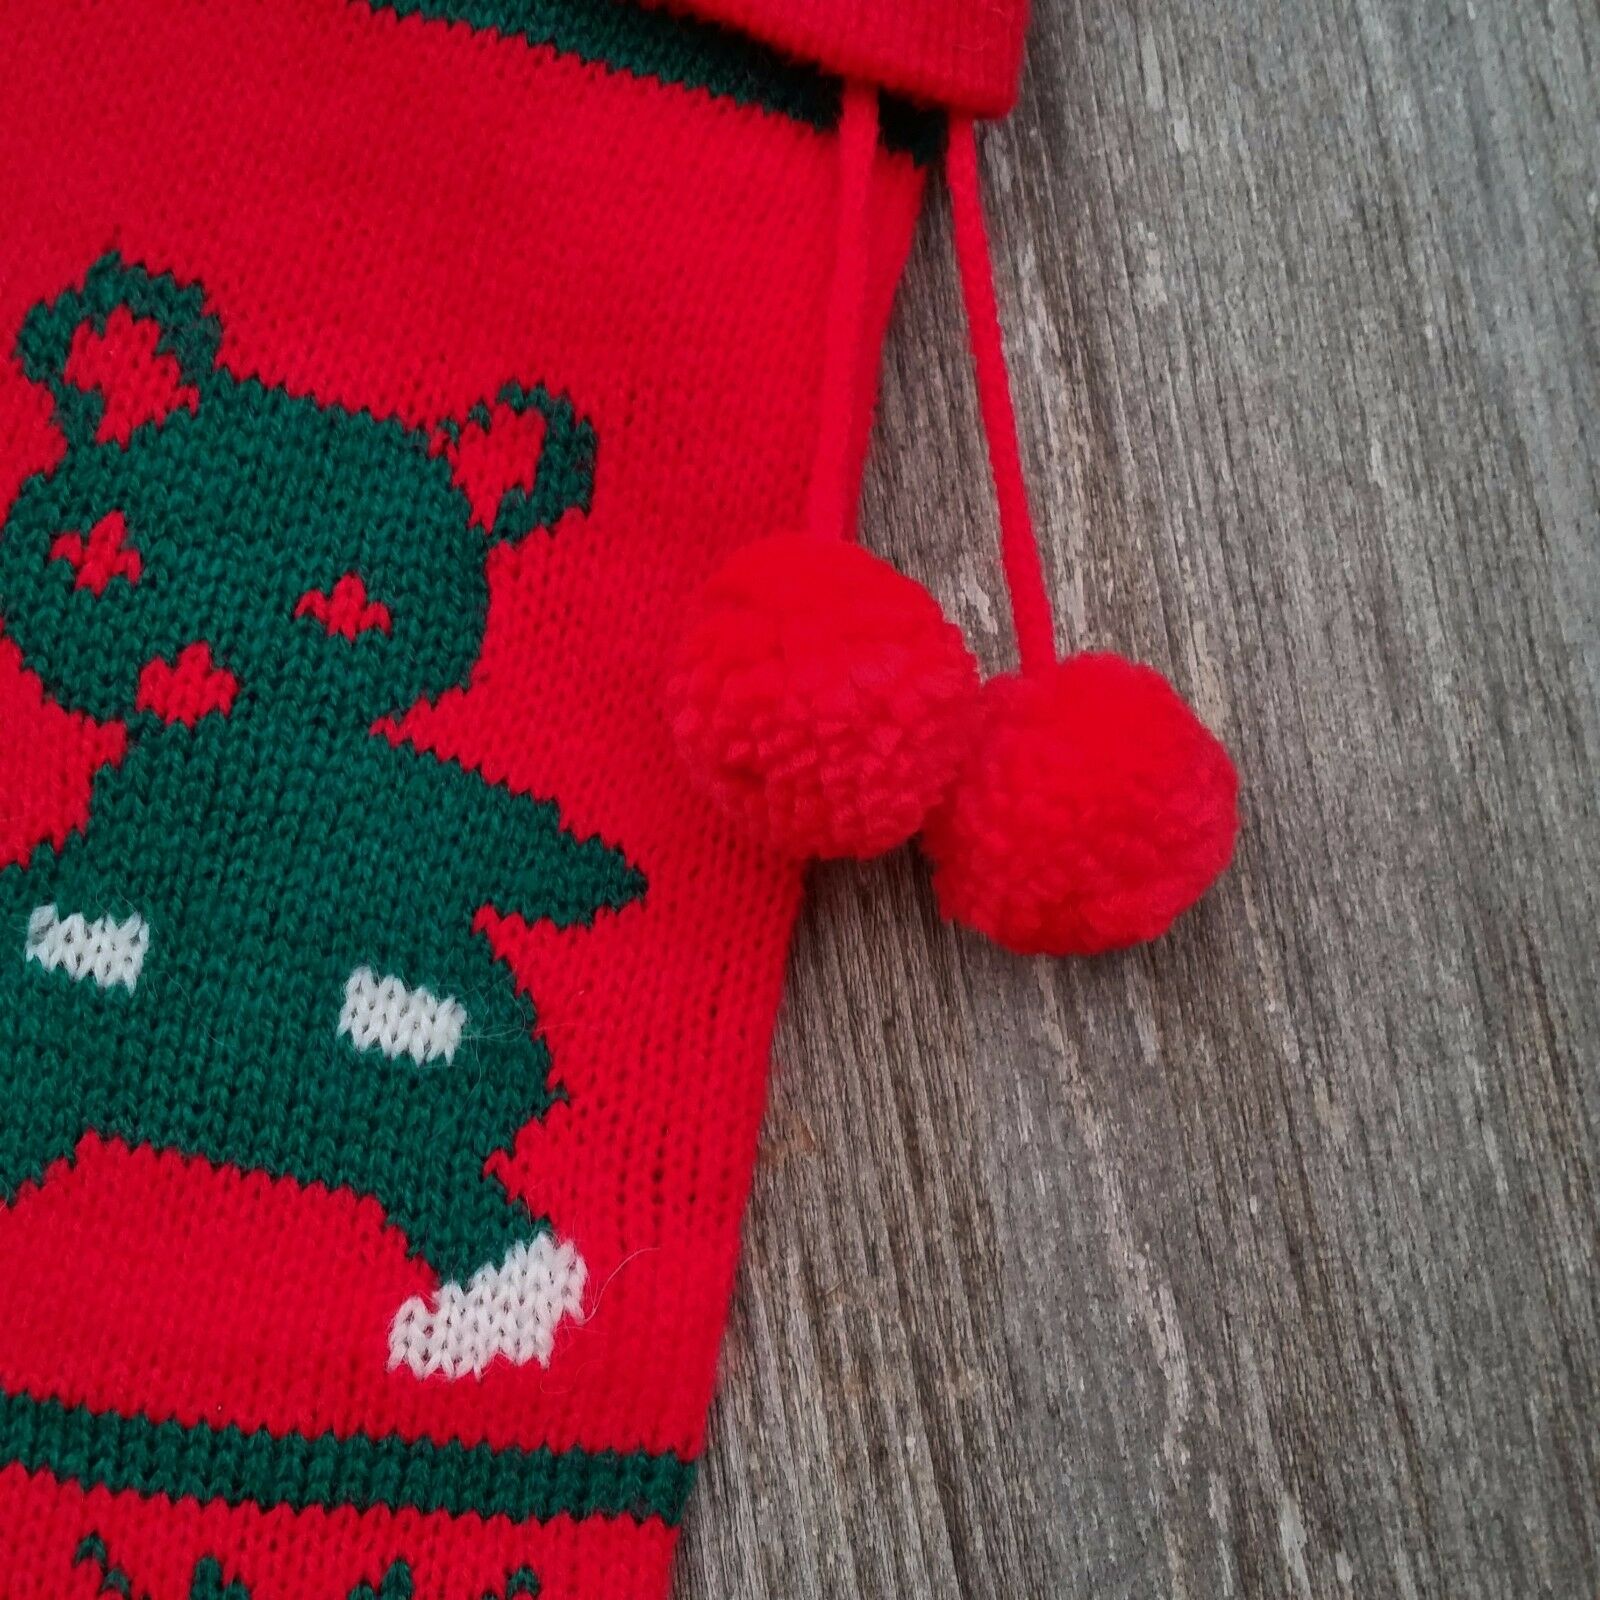 Vintage Teddy Bear Mouse Christmas Stocking Knitted Knit Joy White Red Green - At Grandma's Table